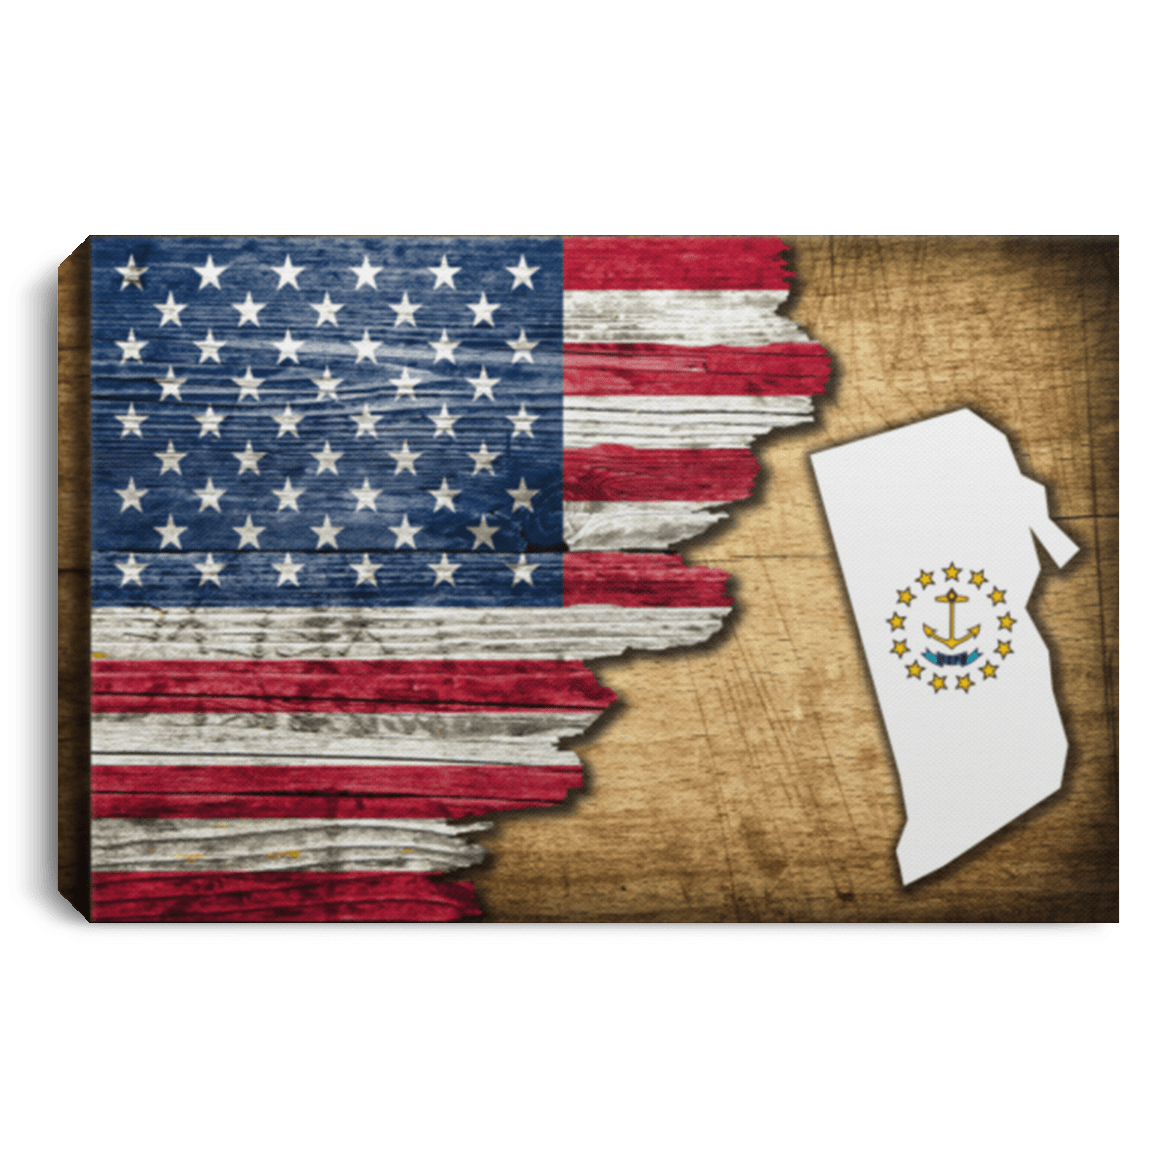 United States/Rhode Island Flag Ripped Effect 12X8 Inches Landscape Canvas .75In Frame